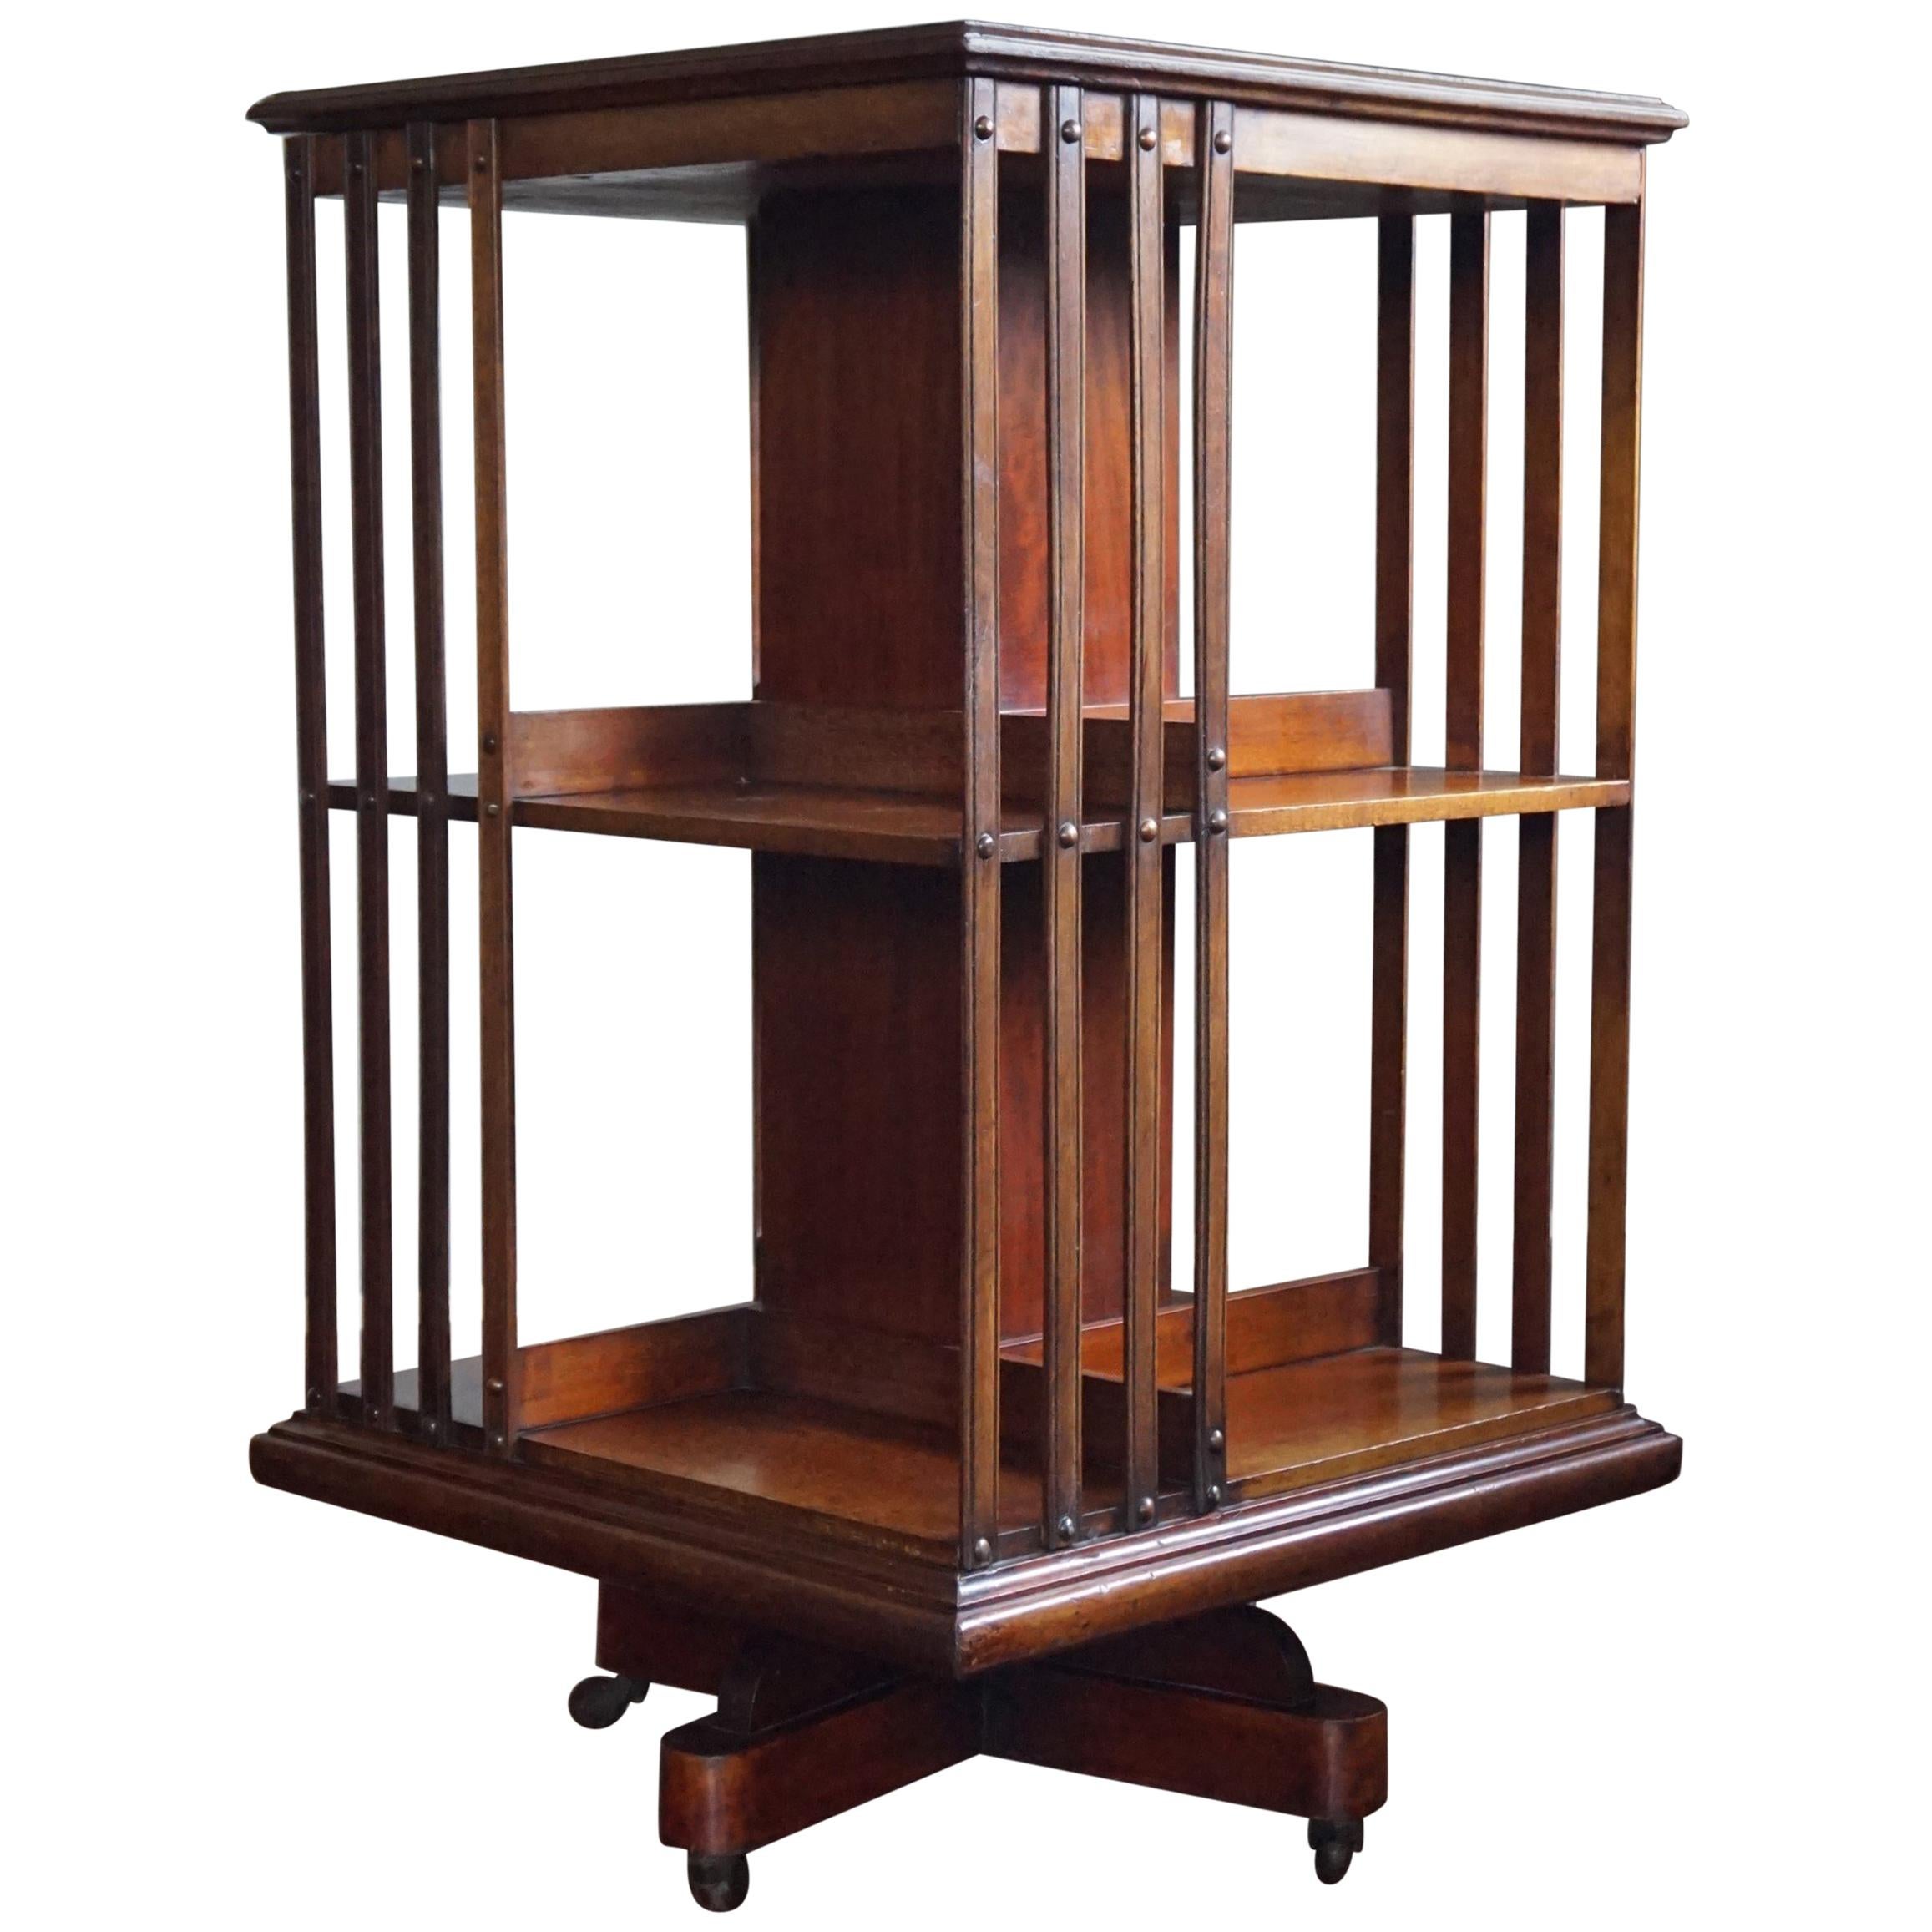 Practical Size Antique Late 19th Century Mahogany Revolving Bookcase on Wheels